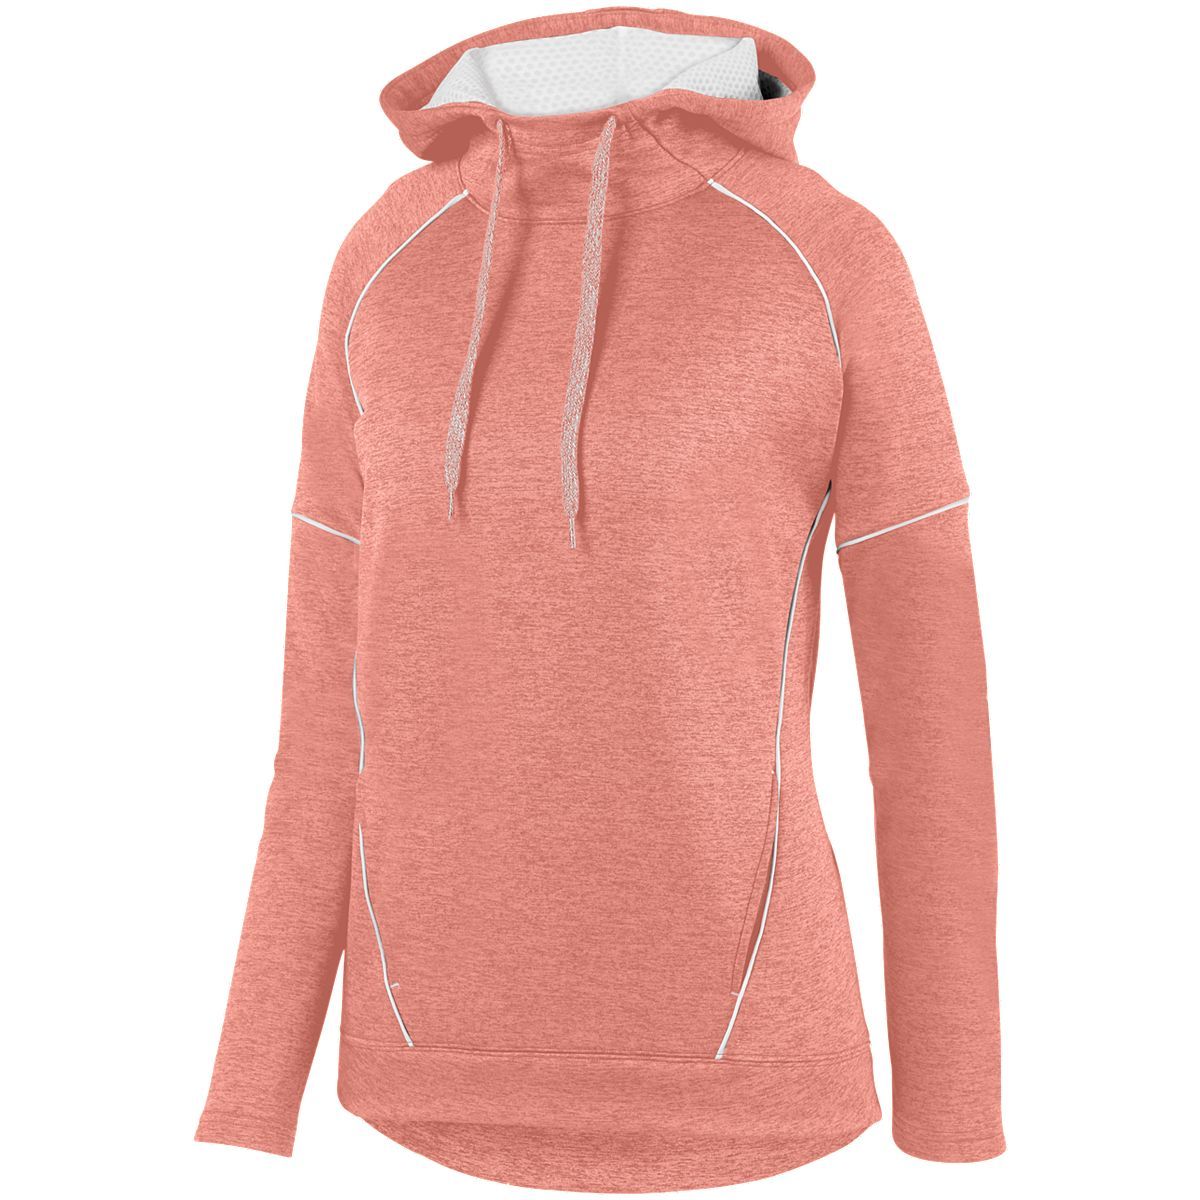 Augusta Sportswear Ladies Zoe Tonal Heather Hoodie in Coral/White  -Part of the Ladies, Augusta-Products, Shirts, Tonal-Fleece-Collection product lines at KanaleyCreations.com